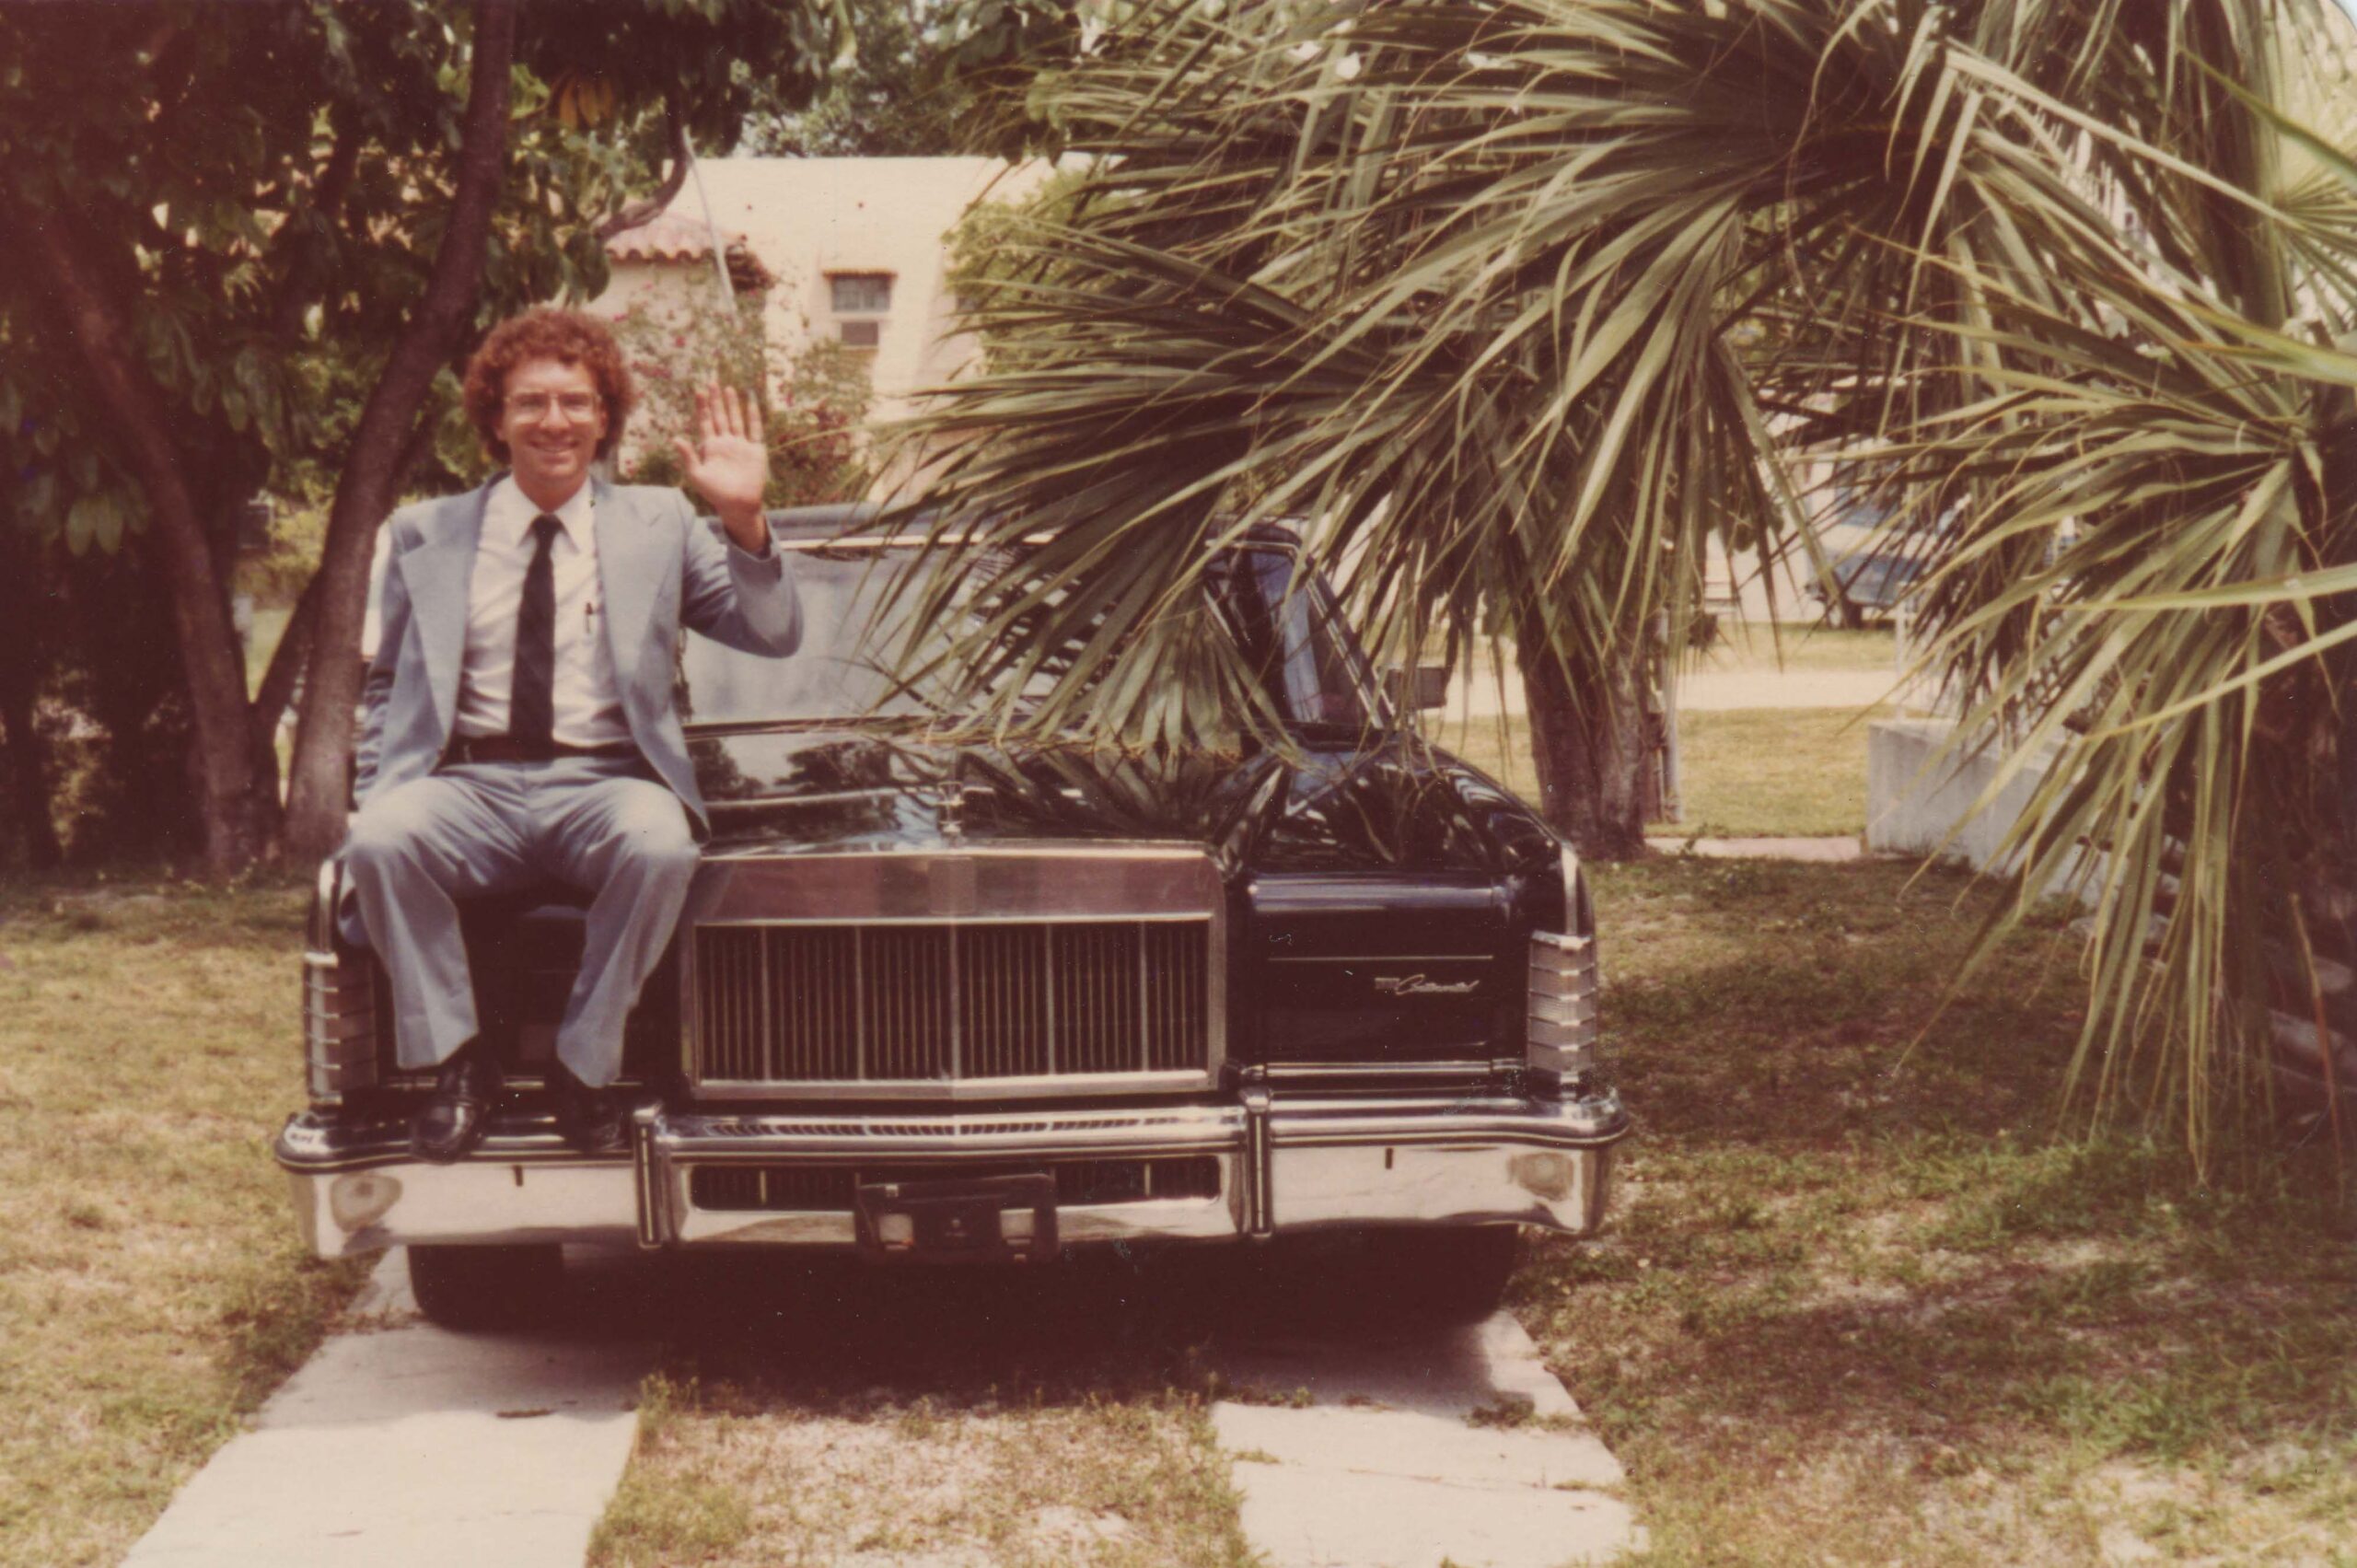 A man in a suit, Zeb Beitchman, suits on the hood of a car and waves. Photo taken in 1983.